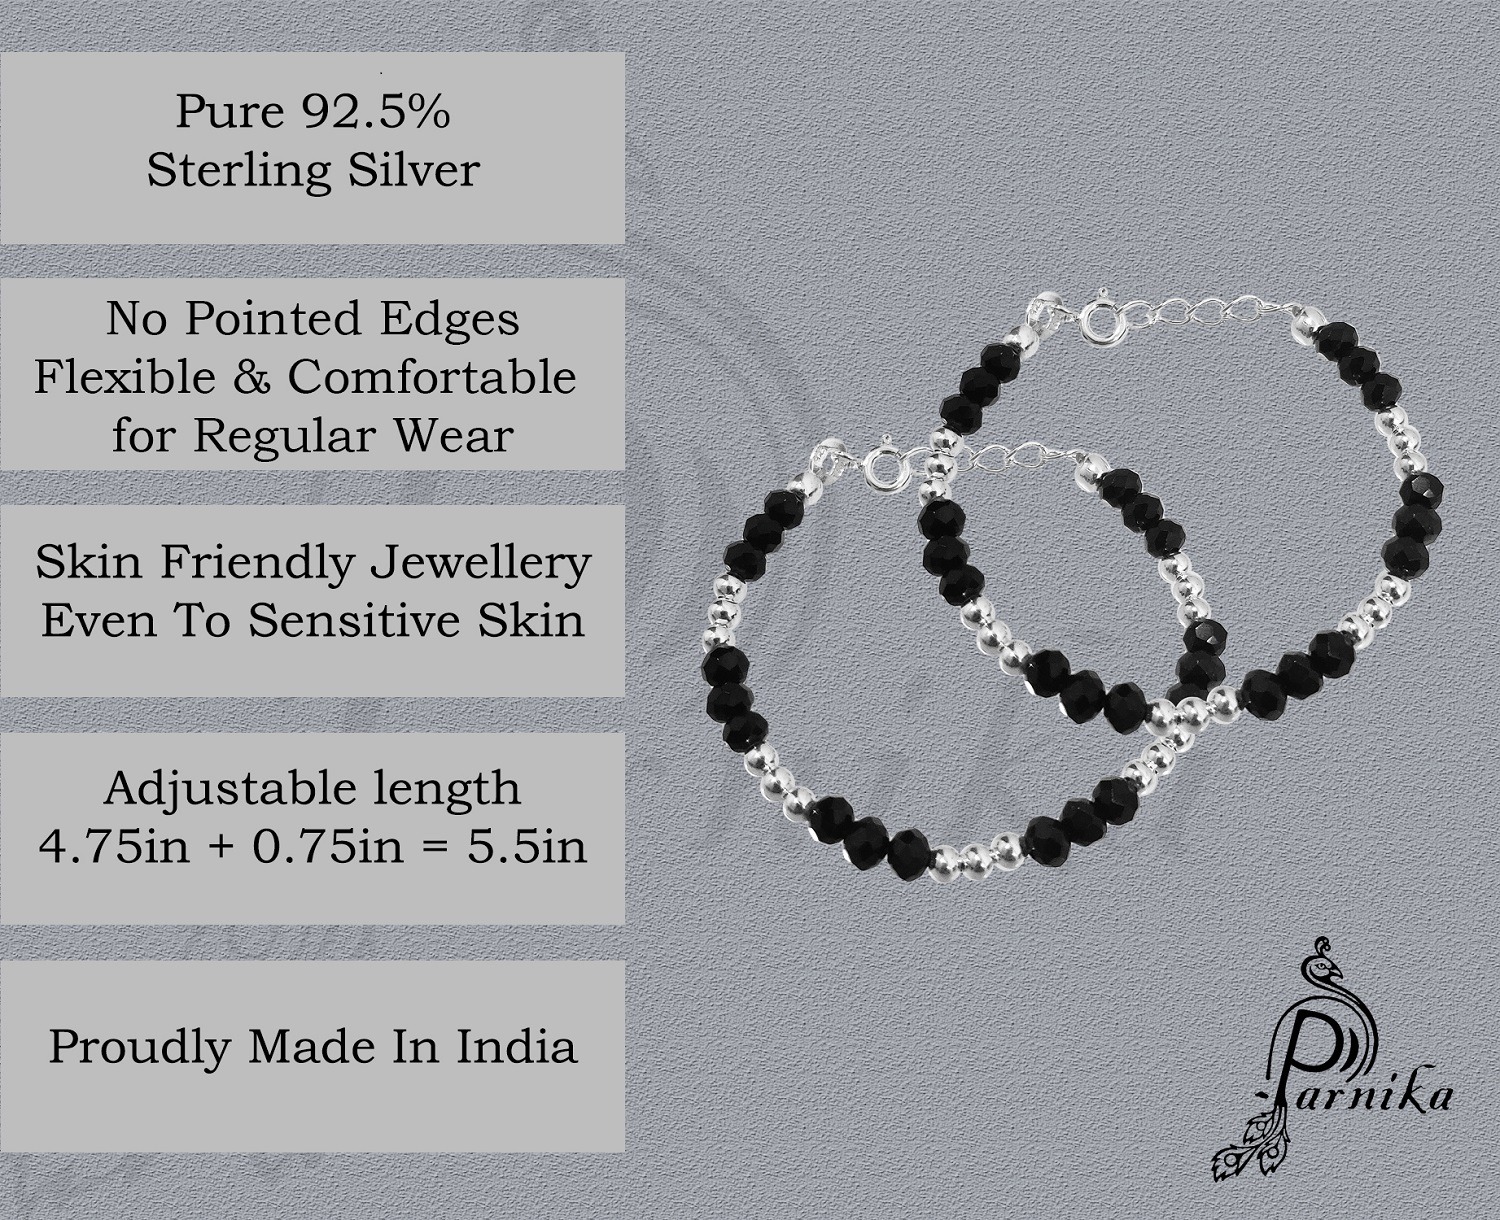 Black Silver BIS Hallmarked 925 Pure Silver Evil eye Baby Nazariya Bracelet  With Black Crystal And Slver Beads Black Online in India, Buy at Best Price  from Firstcry.com - 11559579